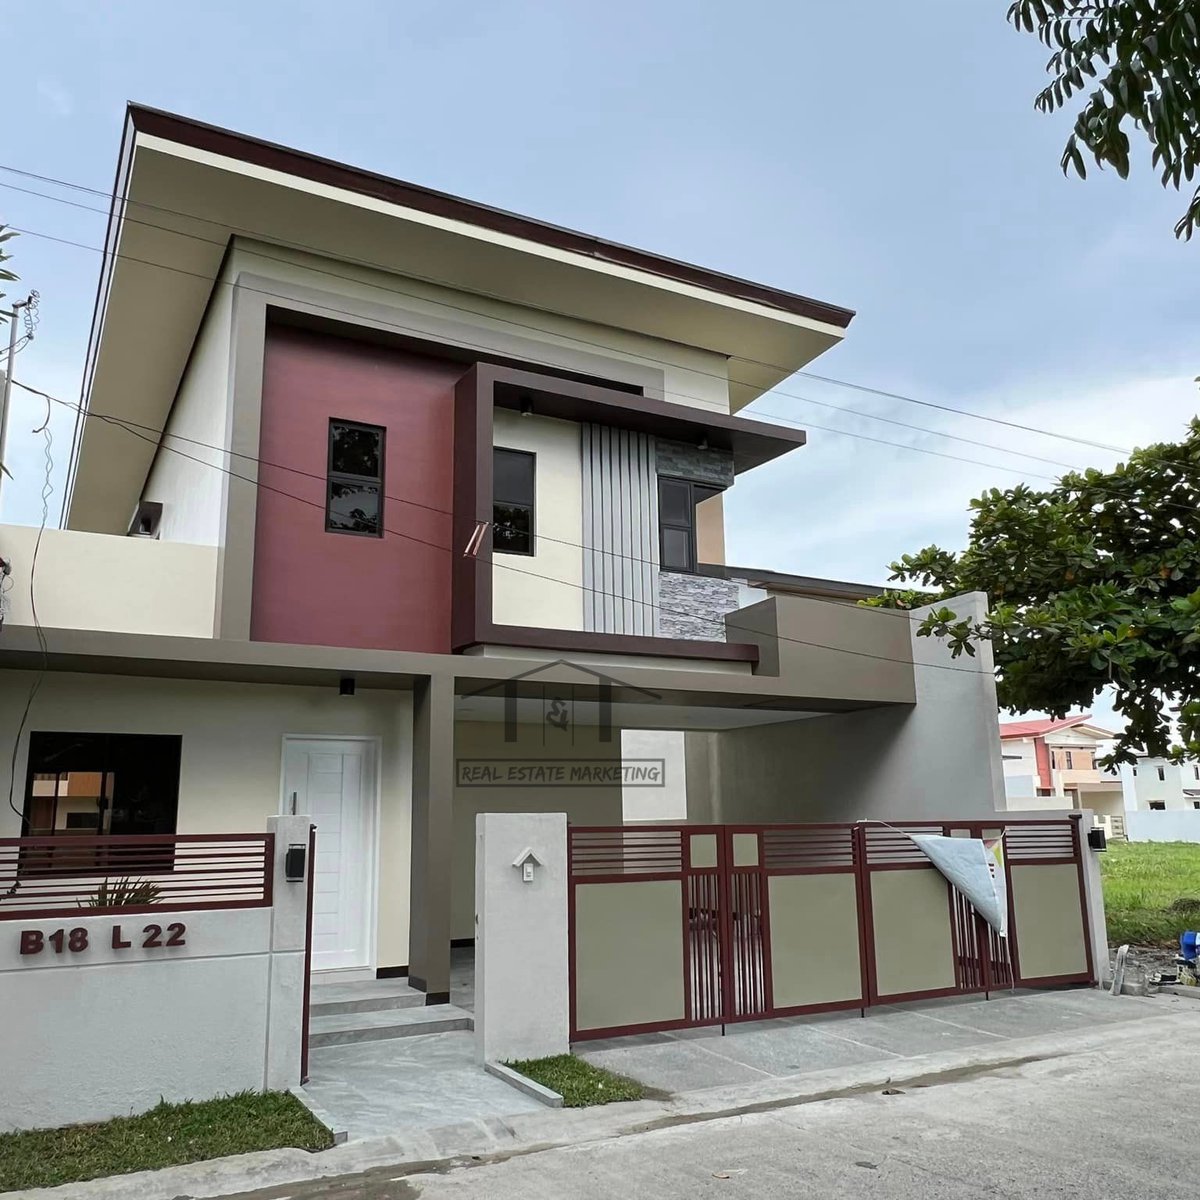 RFO 4 BEDROOM SINGLE DETACHED HOUSE FOR SALE IN IMUS CAVITE